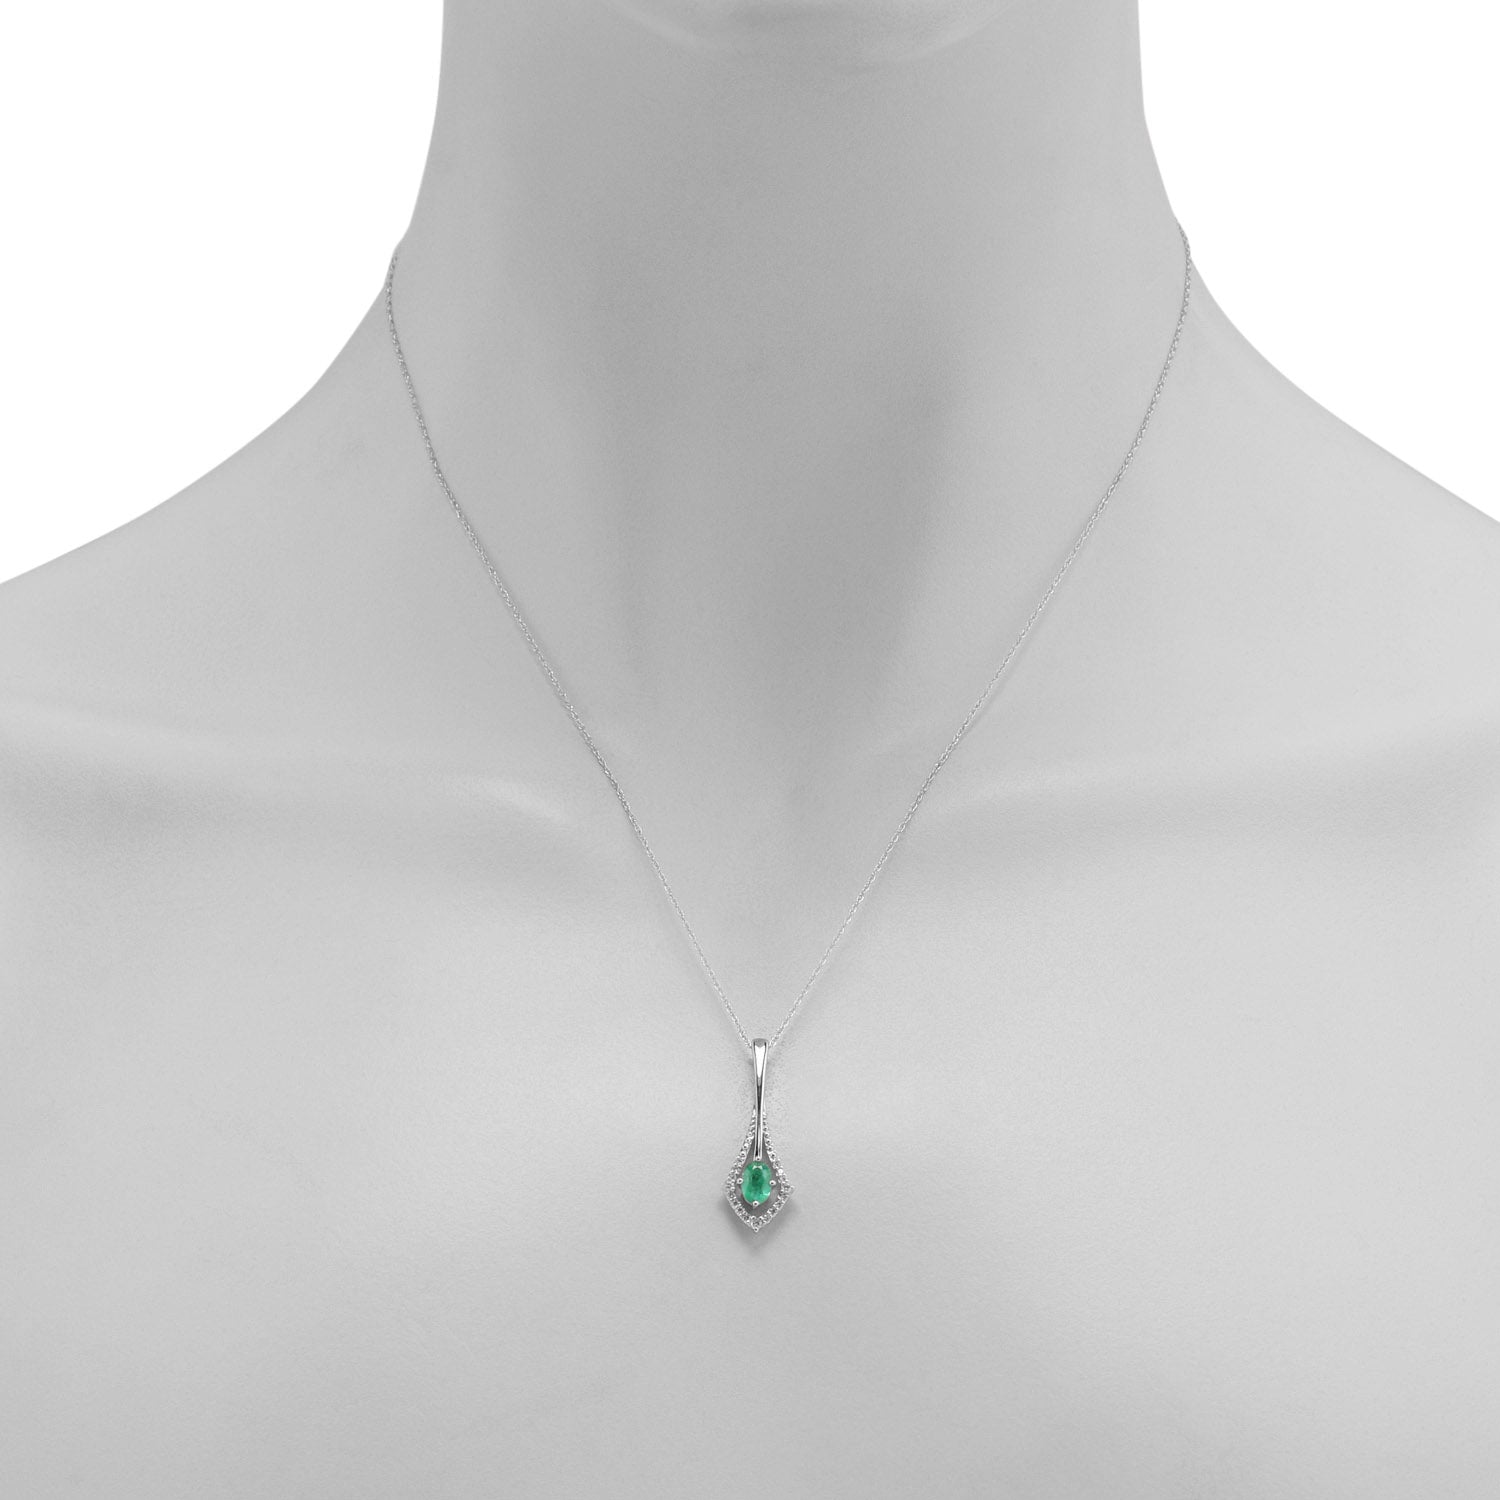 Emerald Necklace in 14kt White Gold with Diamonds (1/10ct tw)